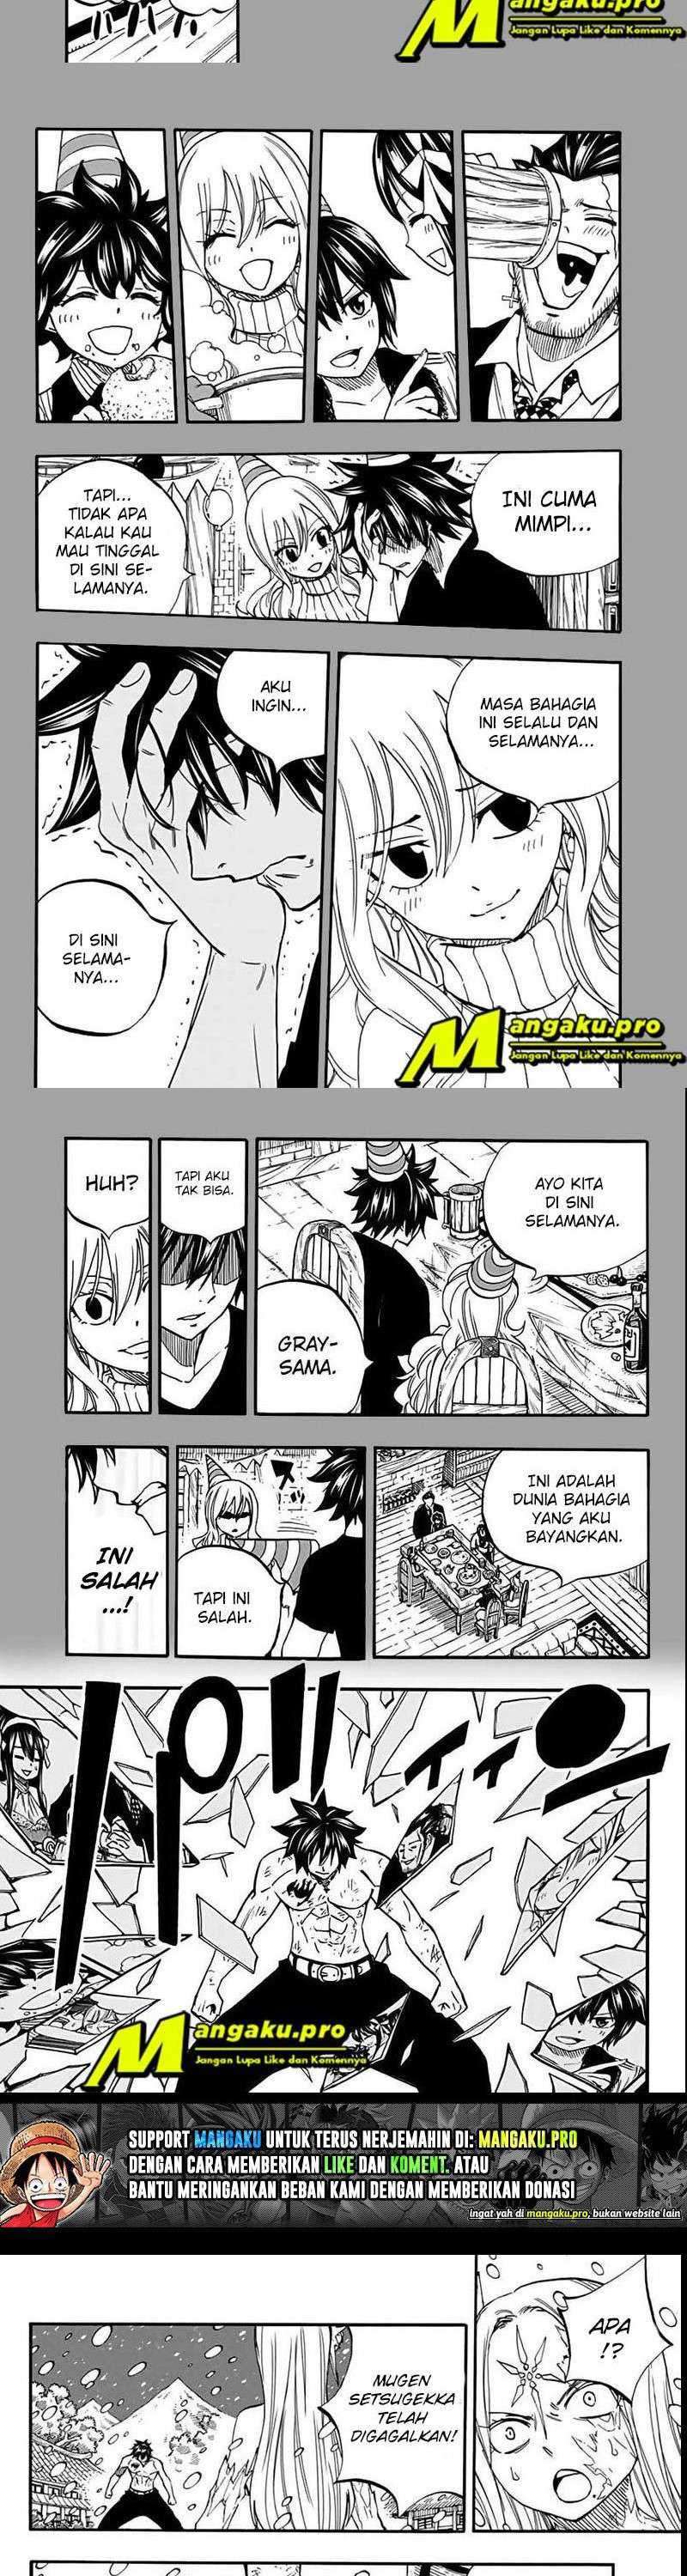 Fairy Tail 100 Years Quest Chapter 84